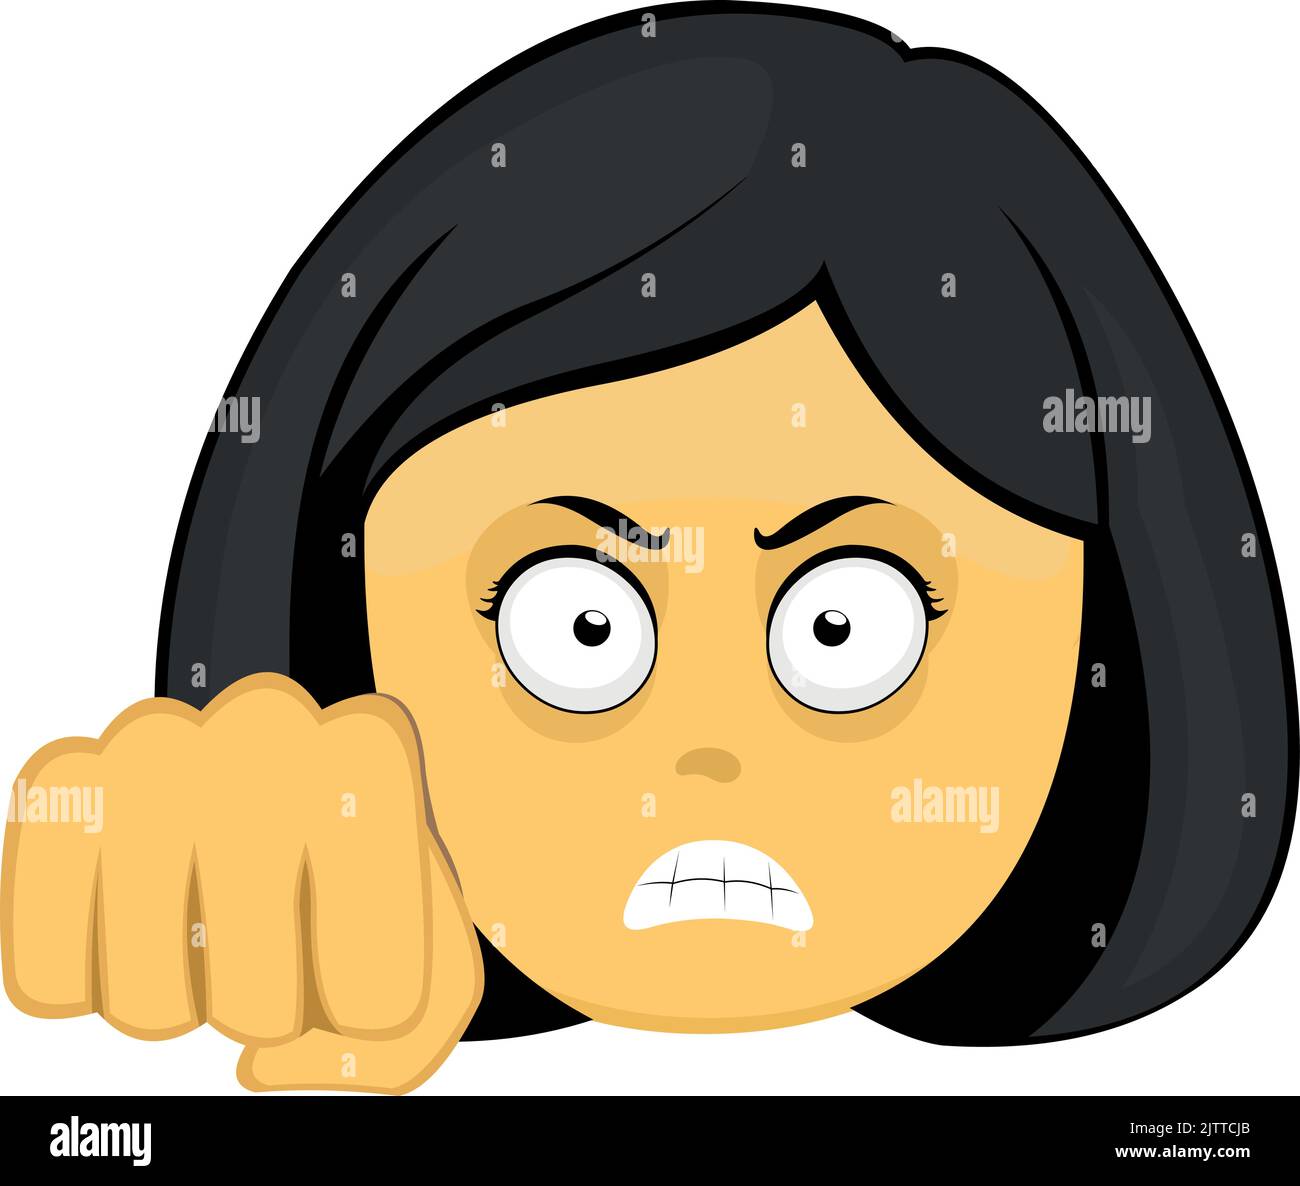 Vector emoticon illustration of a yellow cartoon woman face with an angry expression and giving a fist bump Stock Vector